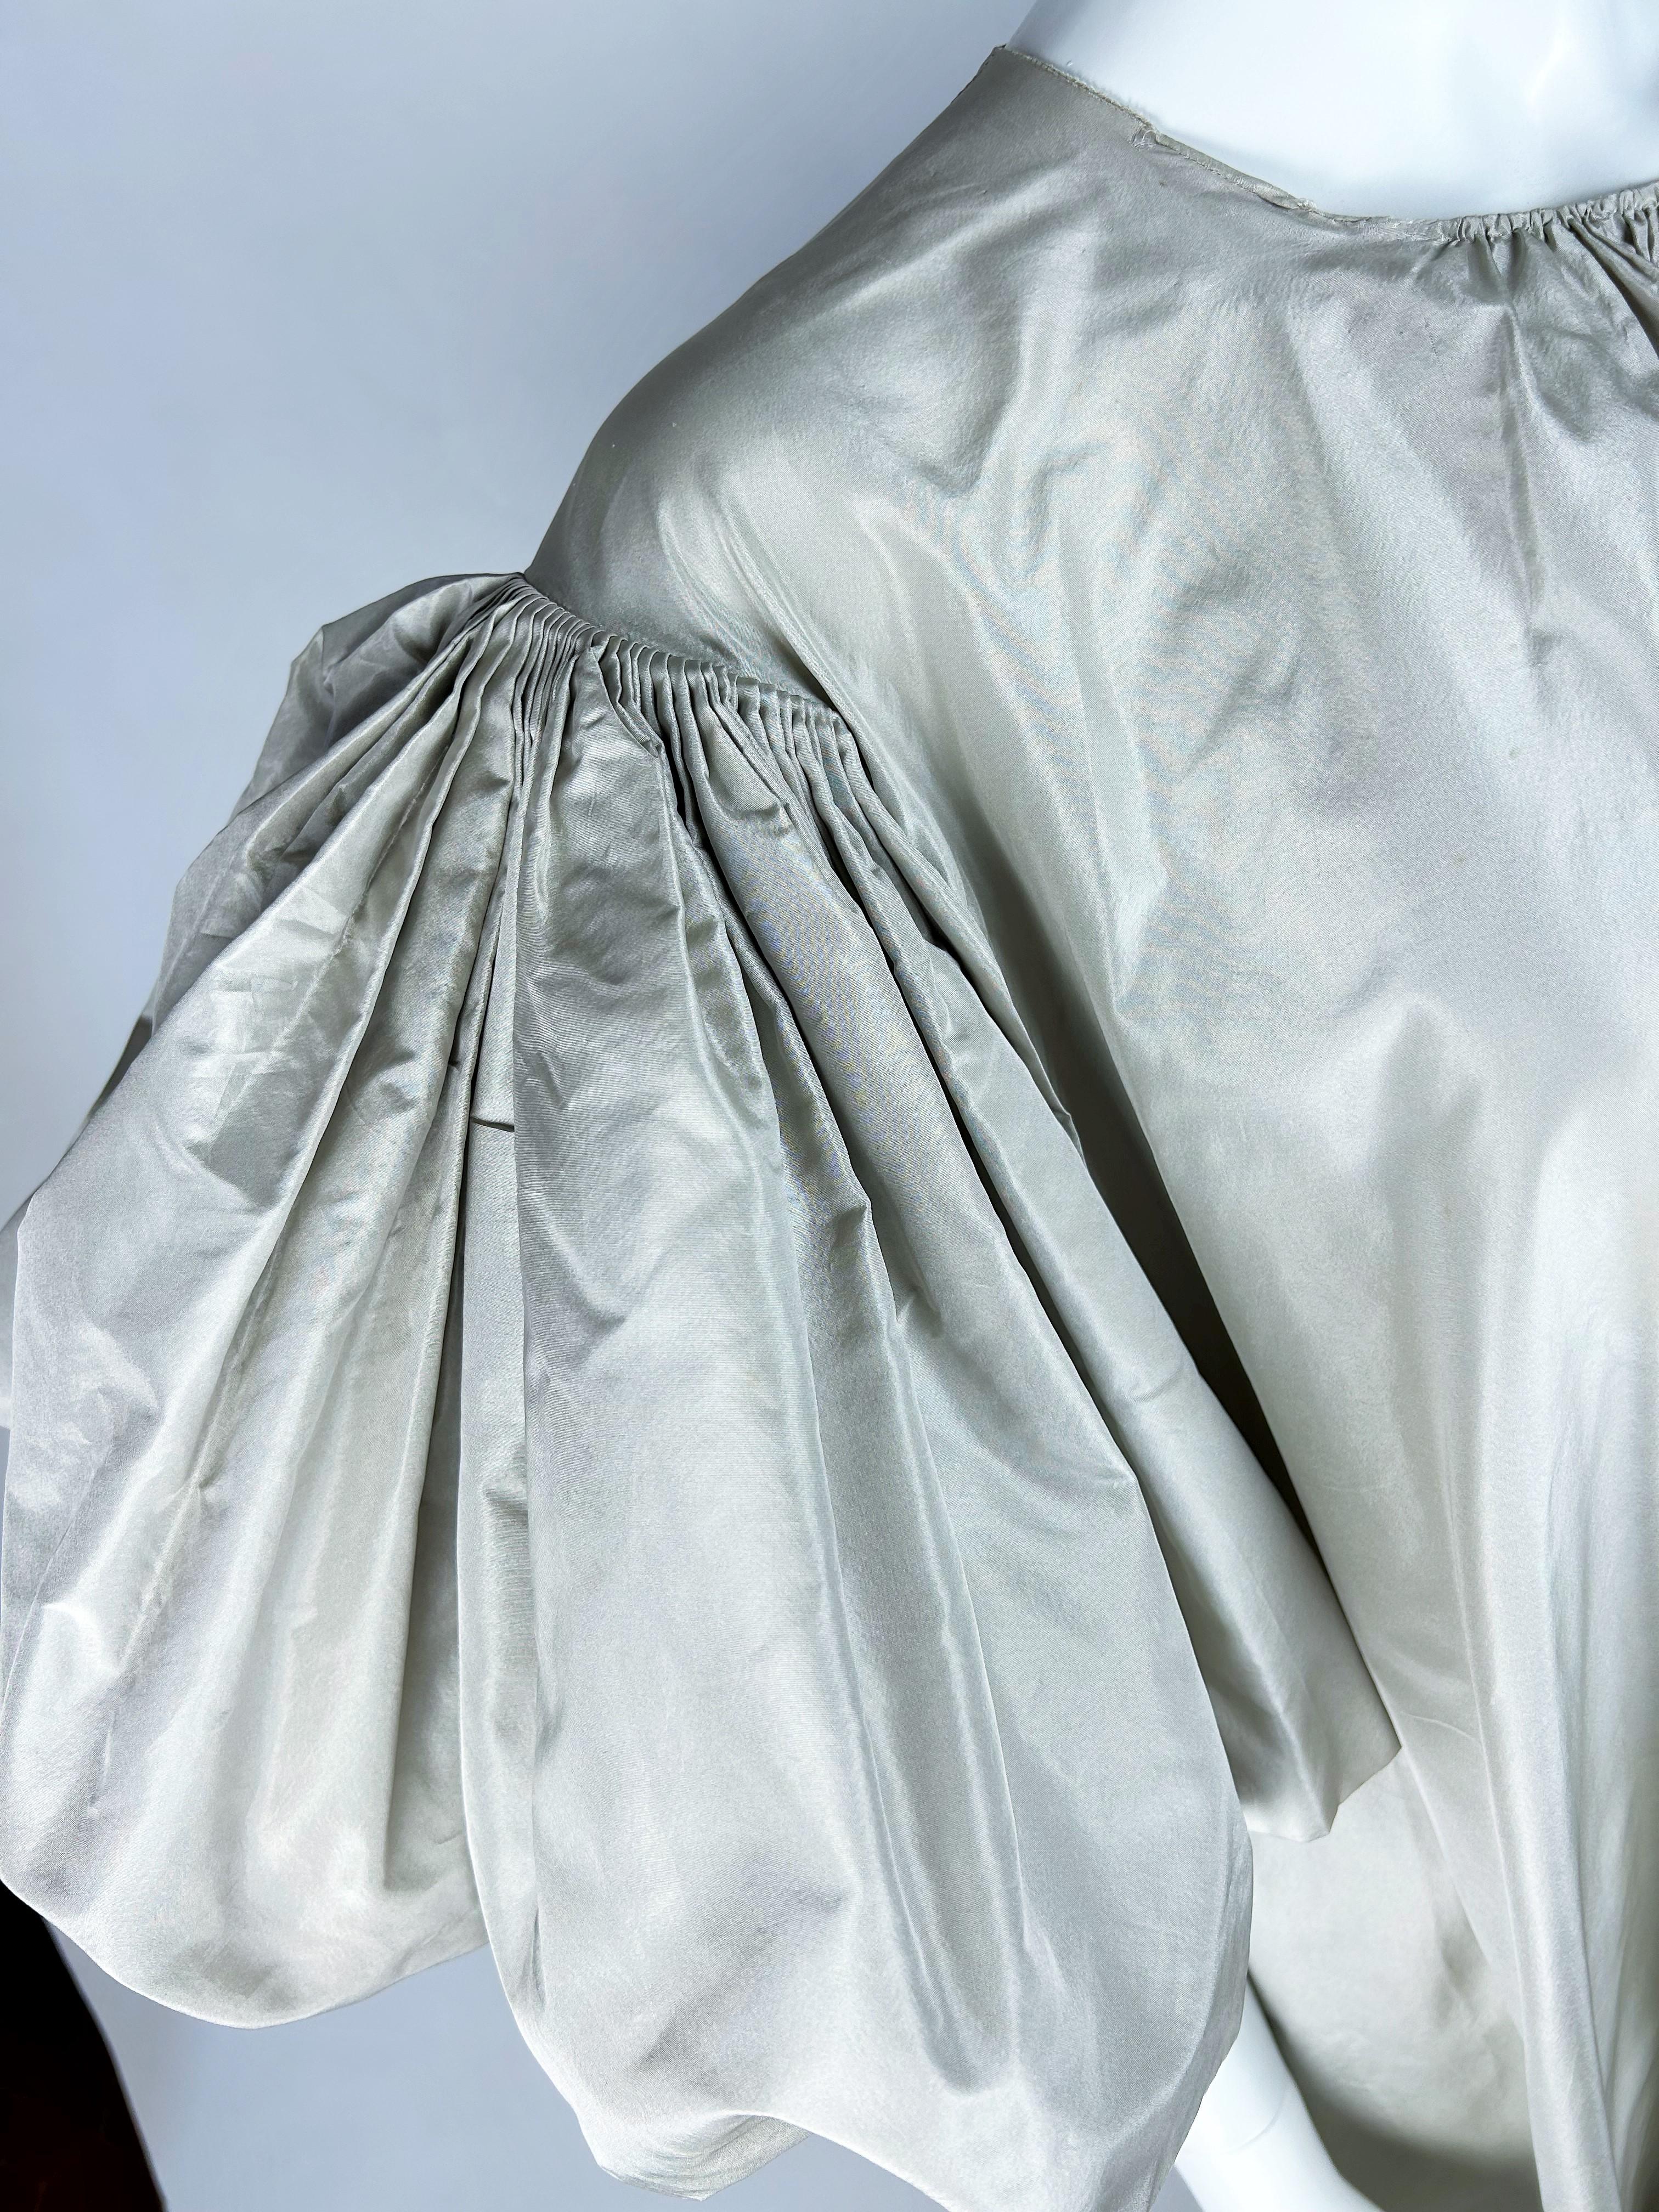 Women's A Taffeta dress by Madame Grès Haute Couture (attributed to) - Paris 1977